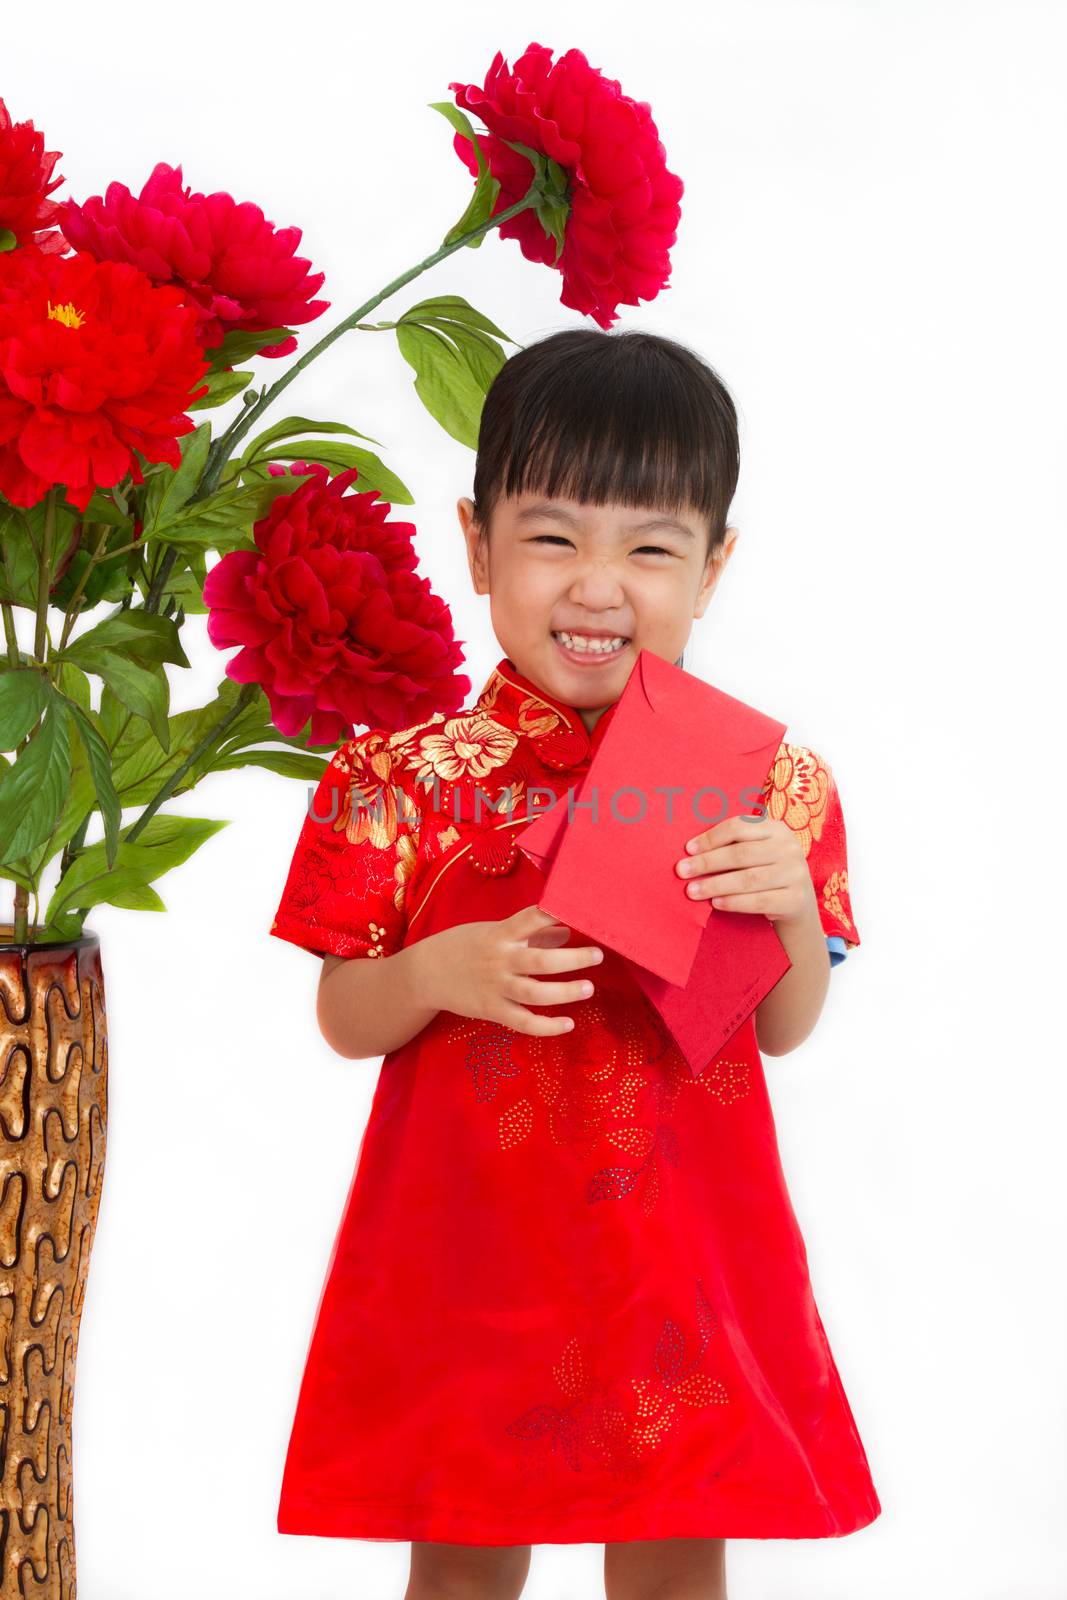 Chinese little girl holding red envelope greeting for Chinese New Year in plain white isolated background.